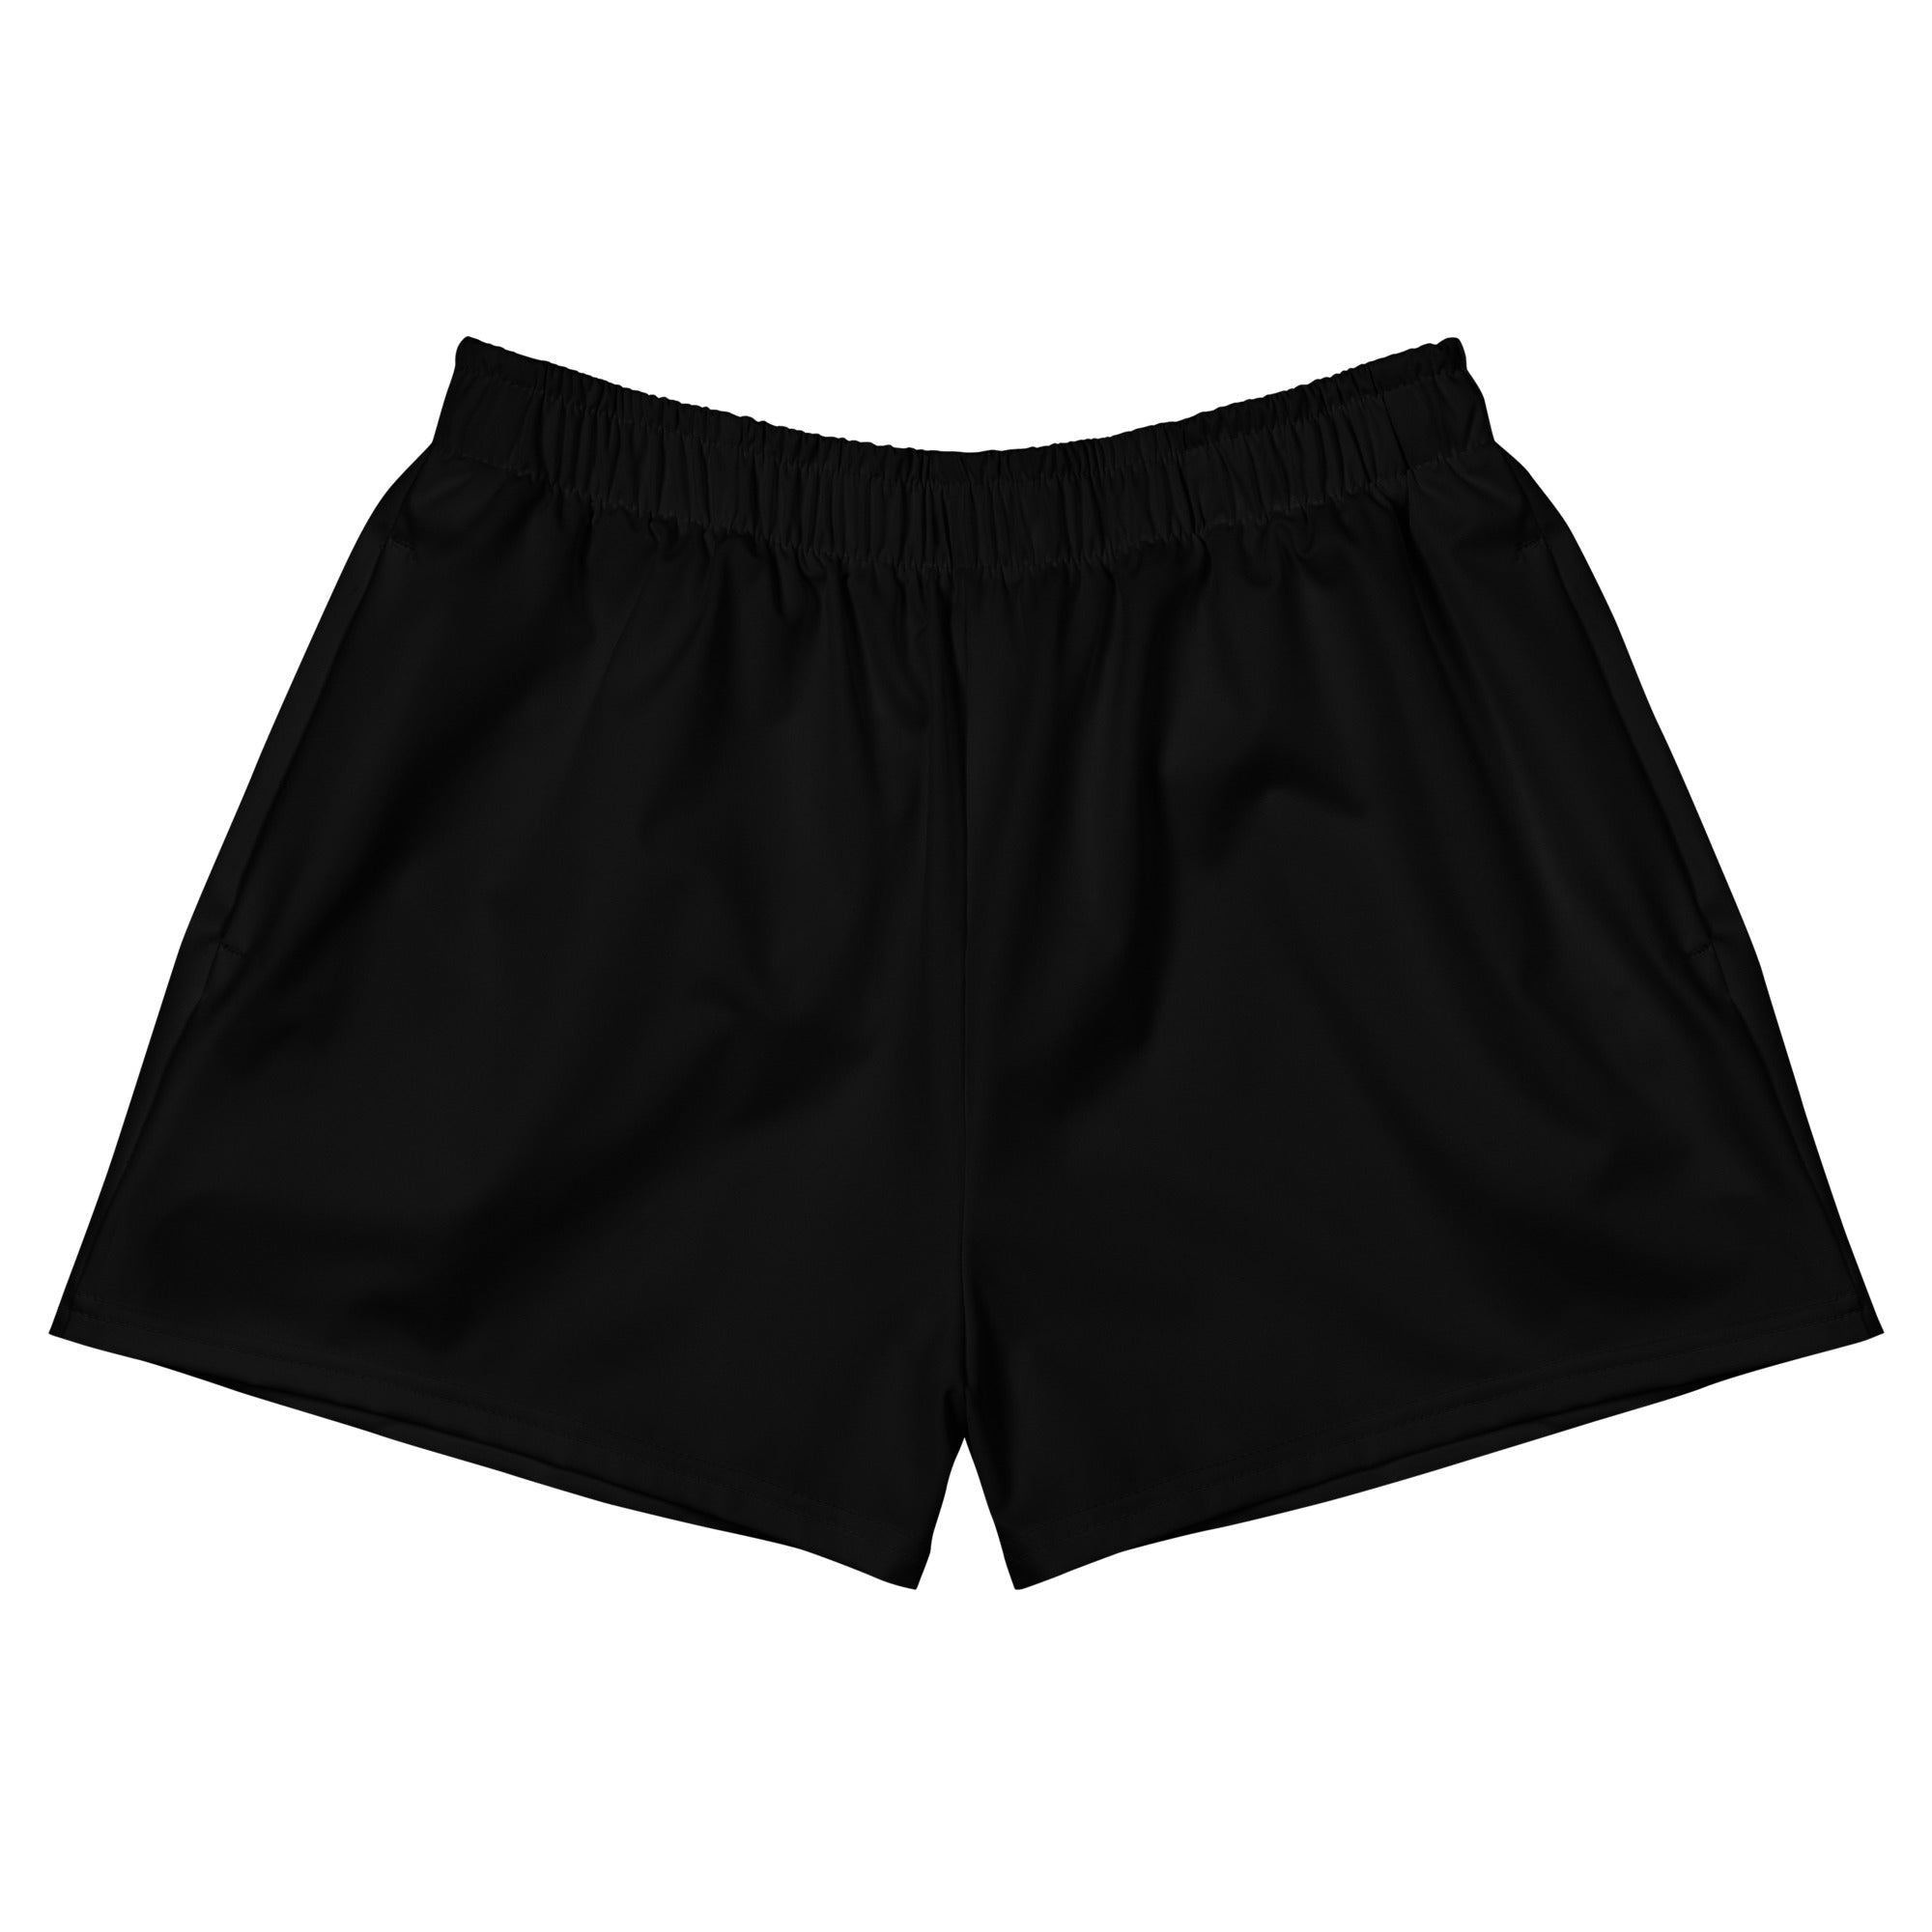 Black Recycled Shorts